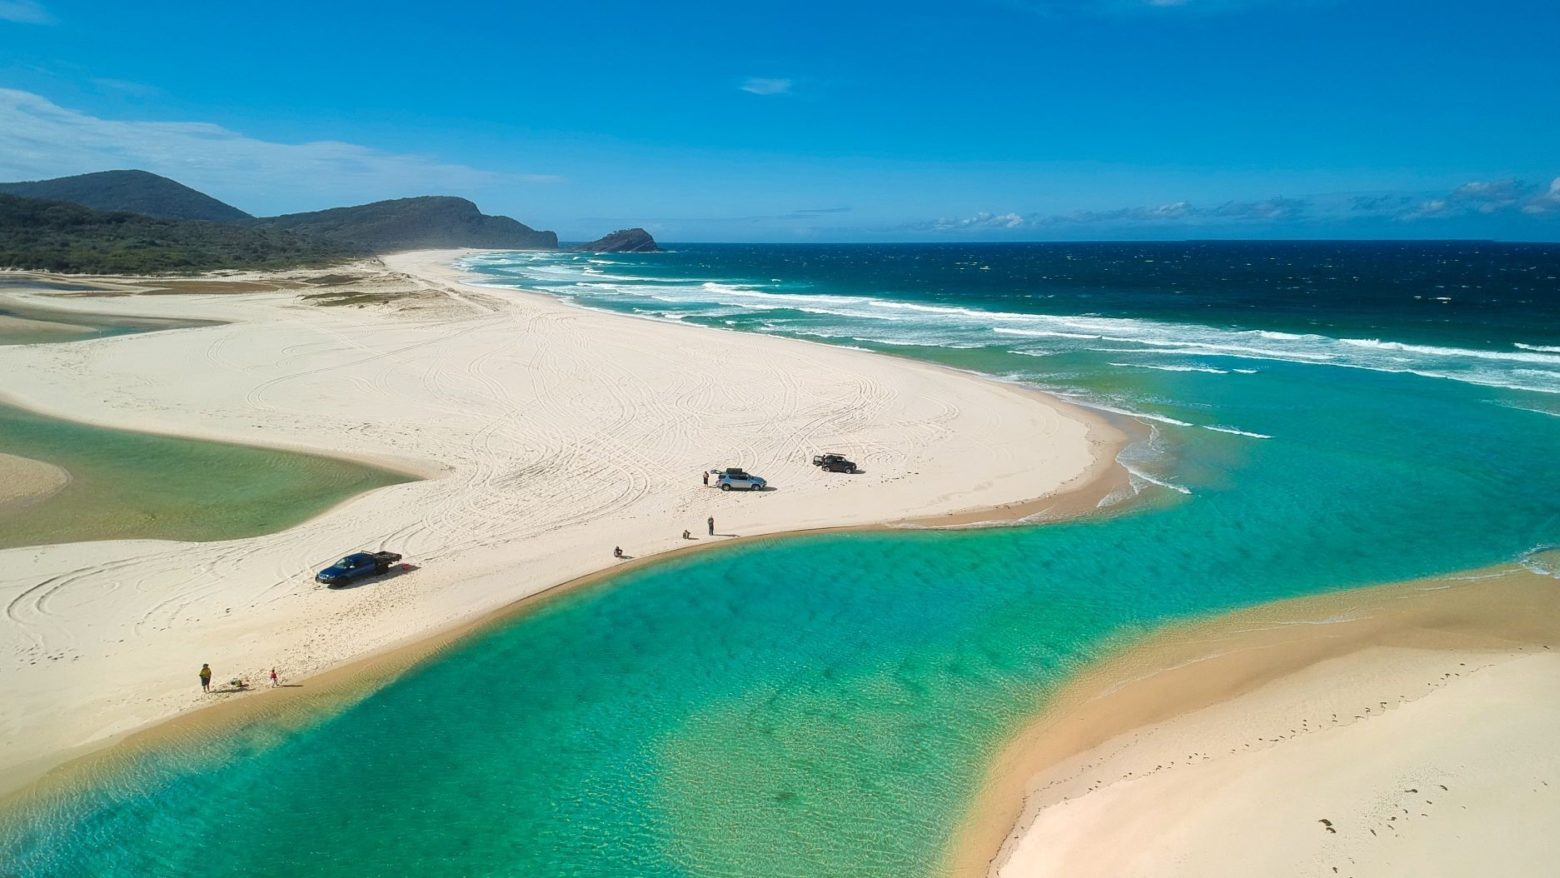 Beach driving is a great way to explore our unspoilt coastline